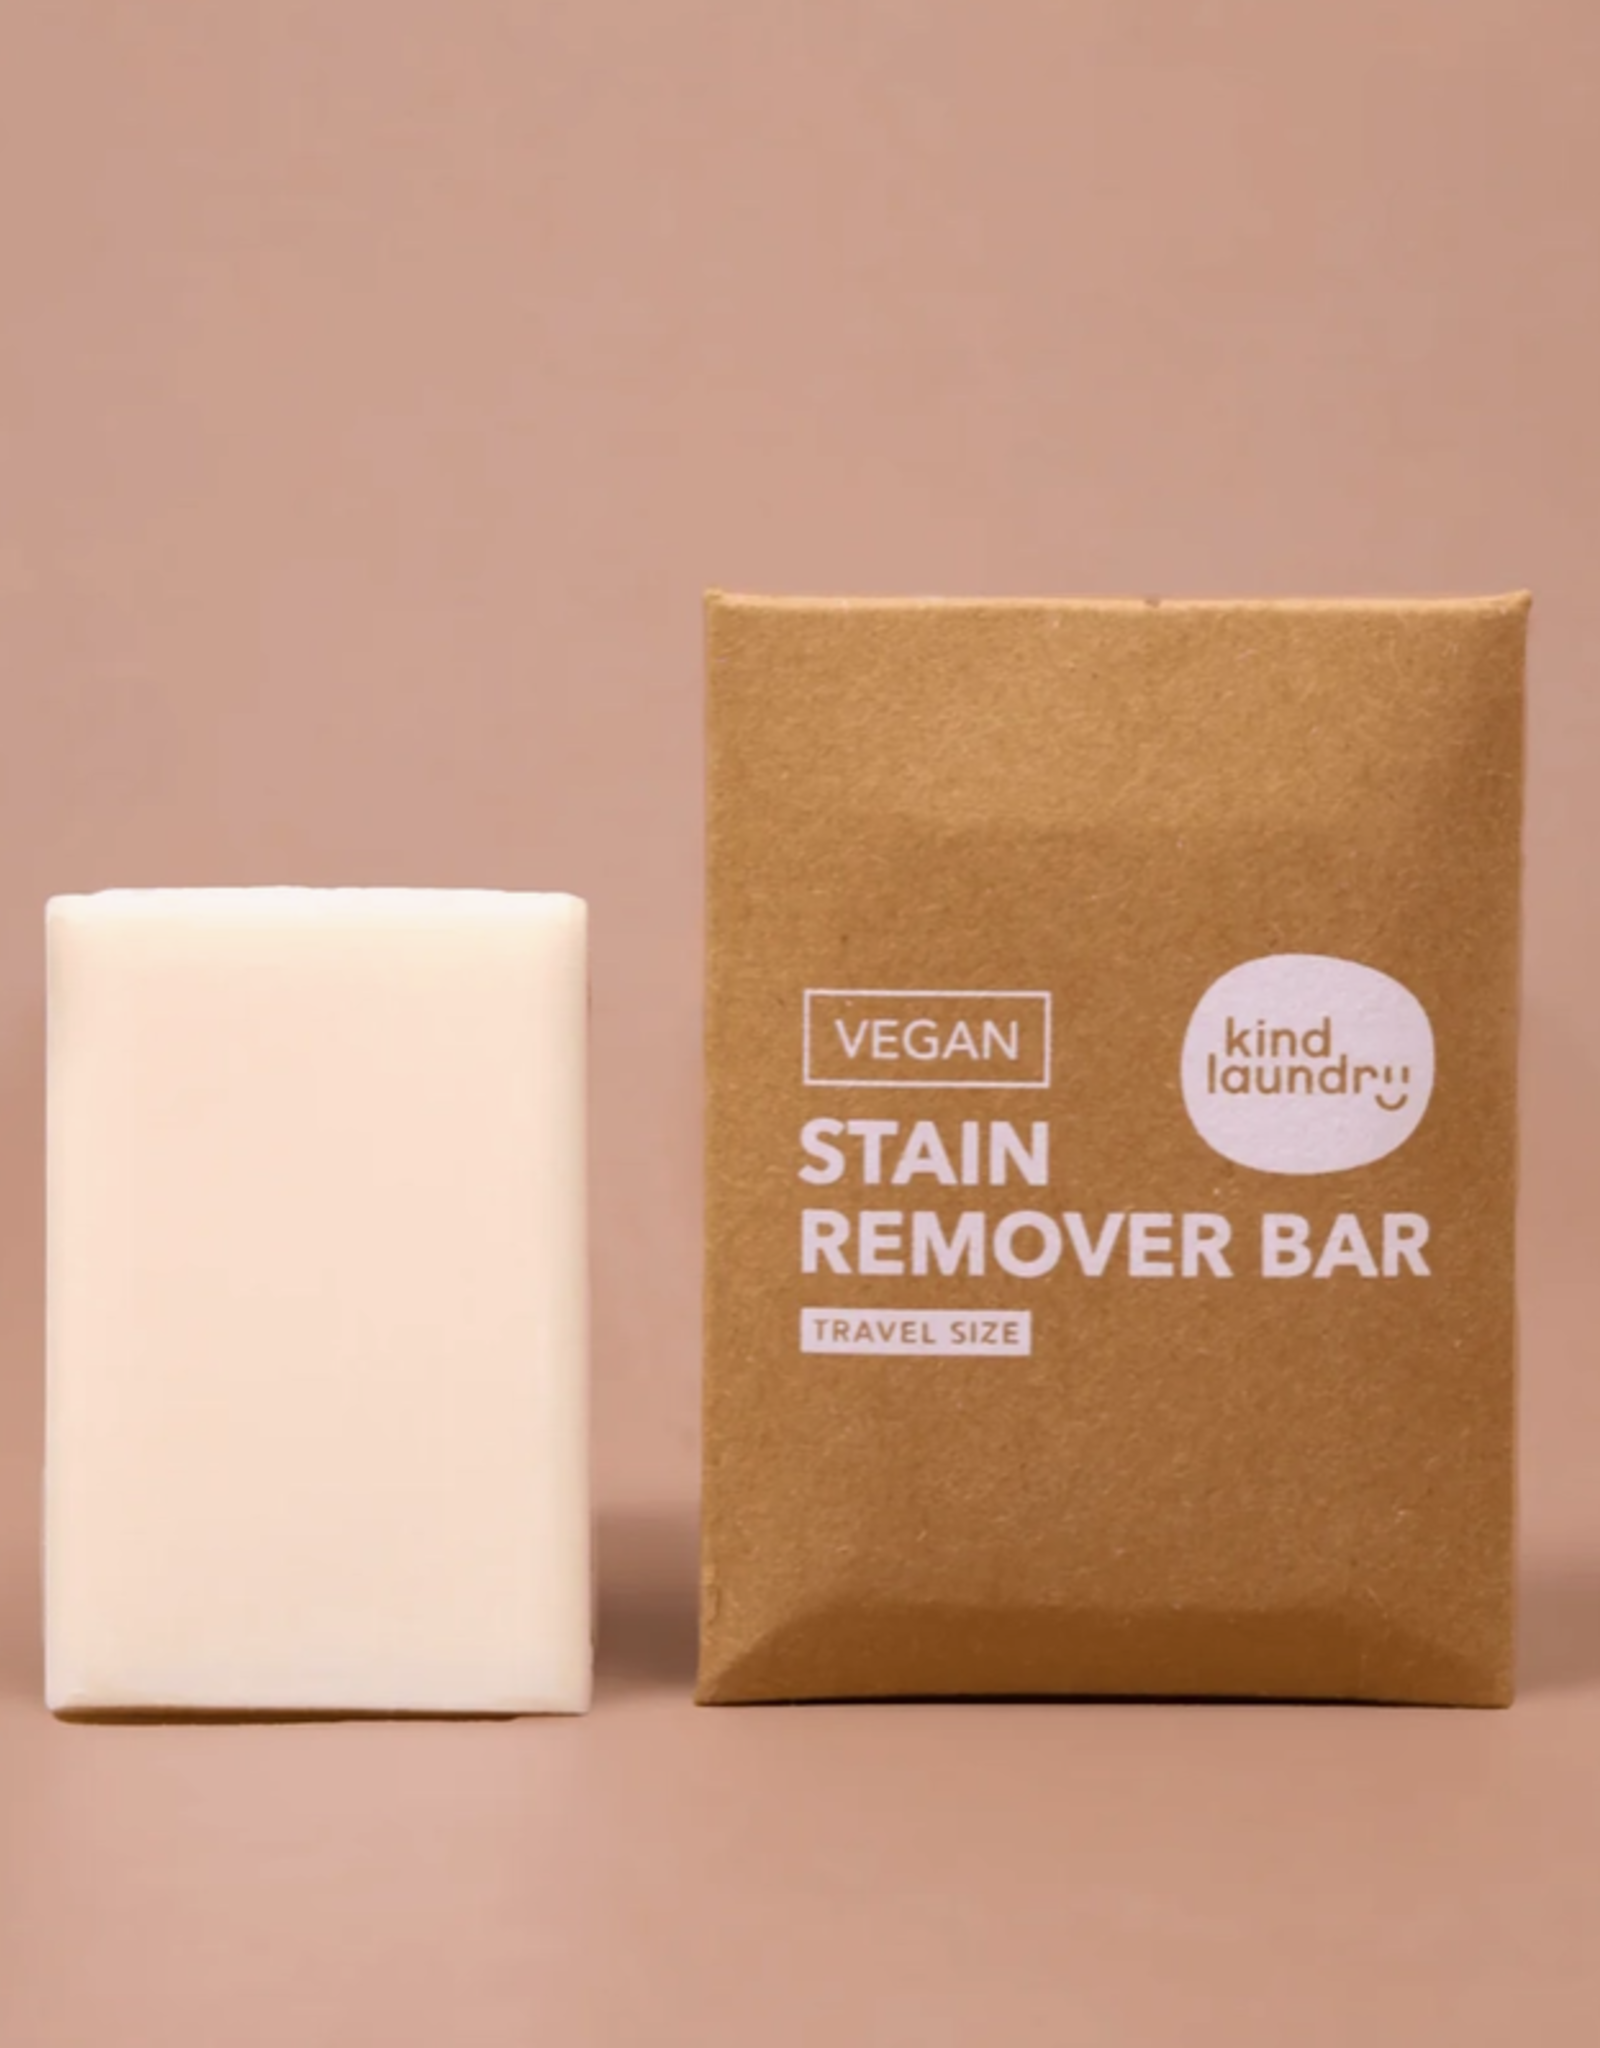 Kind Laundry Vegan Stain Remover Bar - Travel Size